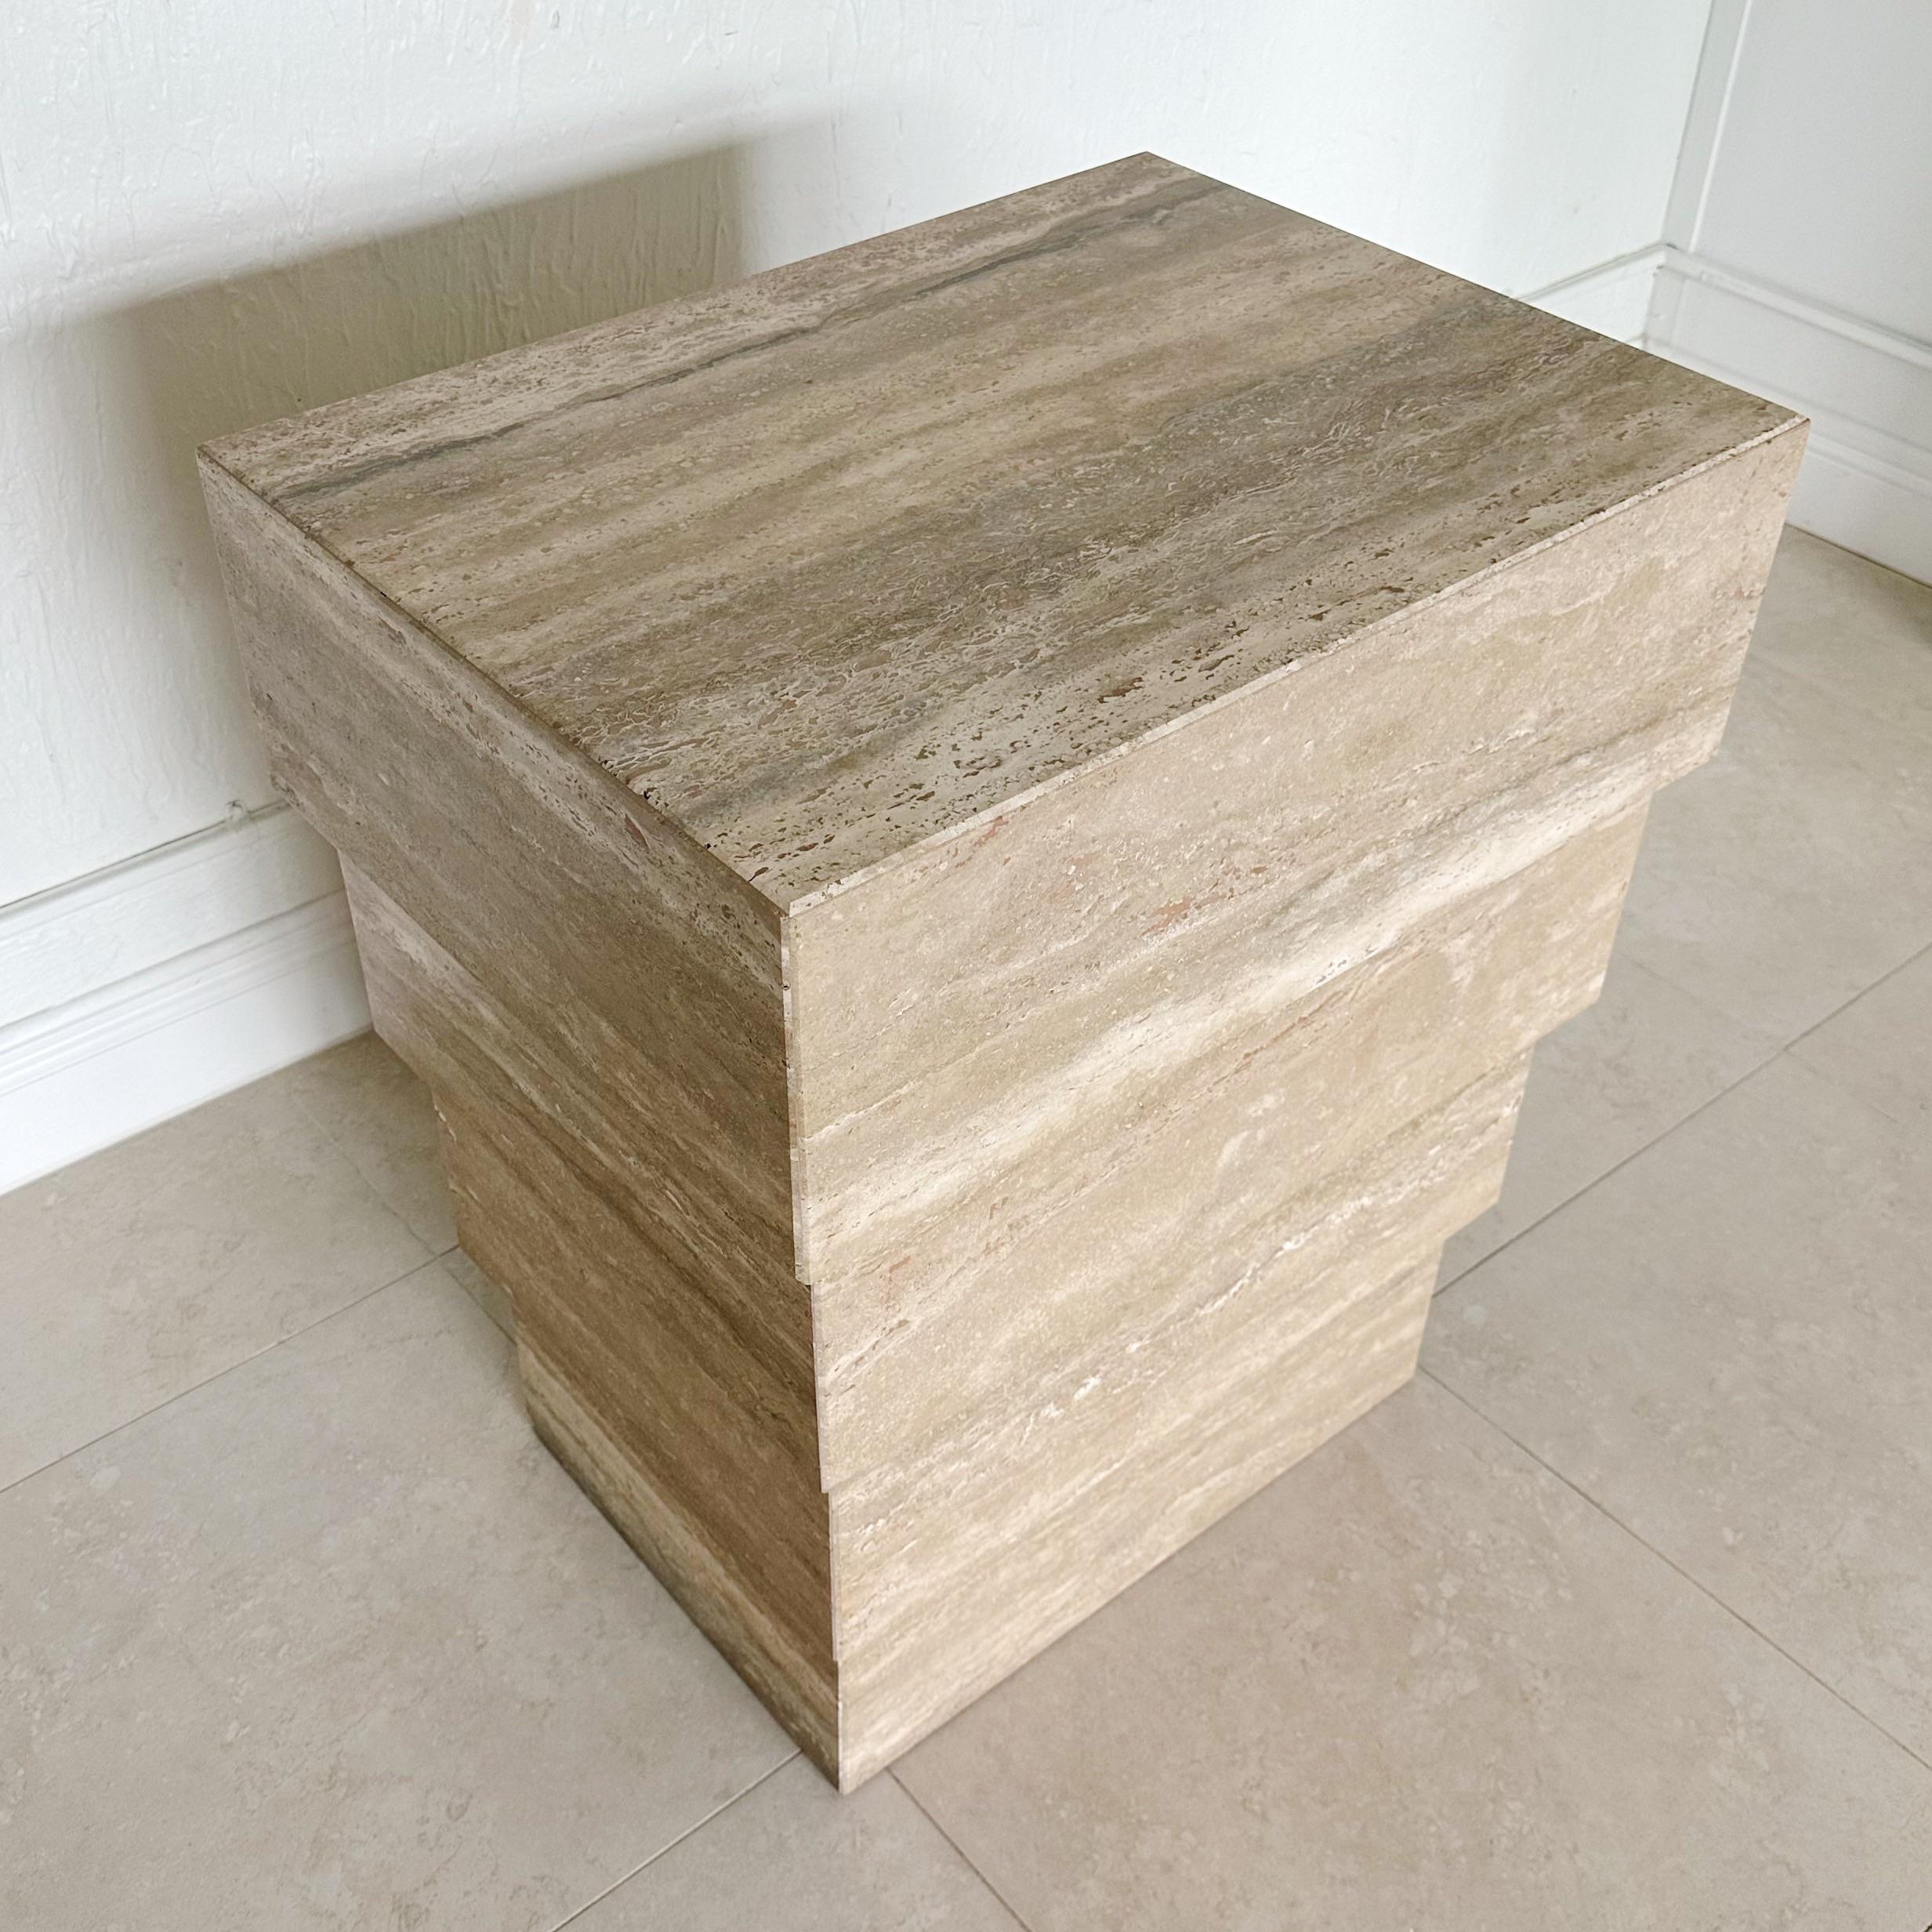 Hand-Crafted Stepped Vintage Honed Italian Travertine Marble Pedestal Table Base